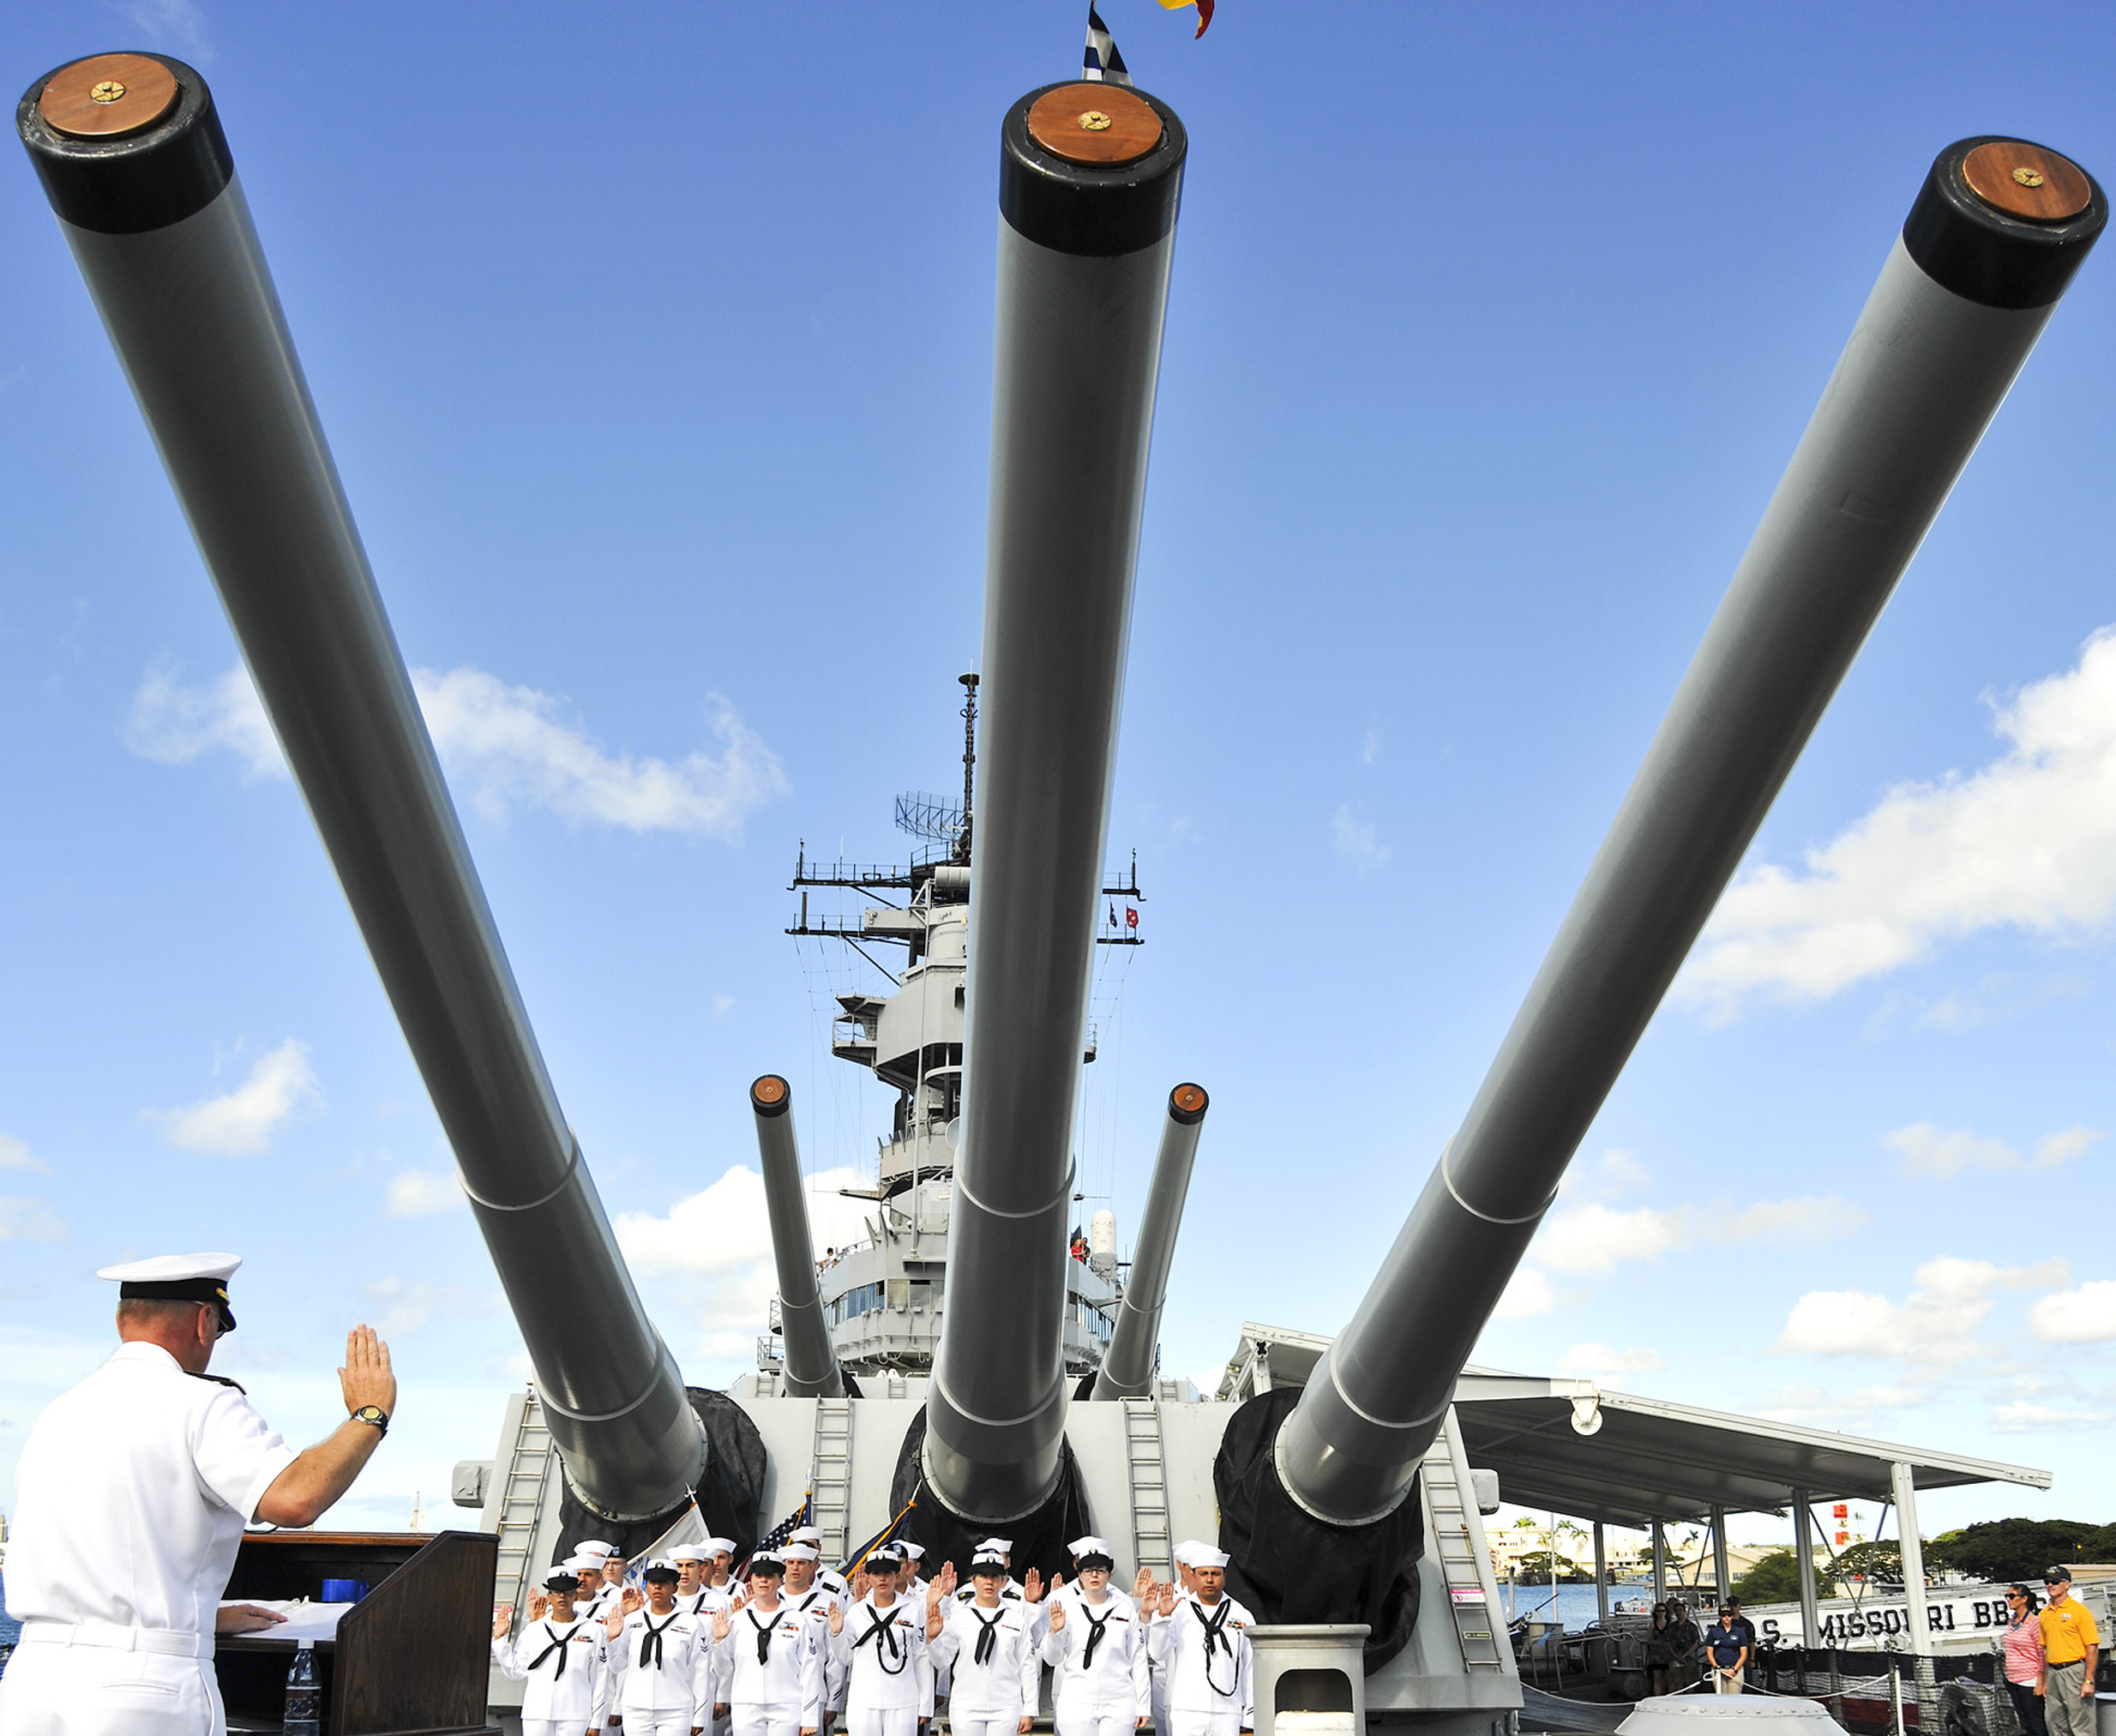 Rear Adm. Rick Williams, commander of Navy Region Hawaii and Naval Surface Group Middle Pacific, serves as reenlisting officer for service members aboard the Battleship Missouri Memorial on Ford Island at Joint Base Pearl Harbor-Hickam on July 4, 2014. US Navy Photo